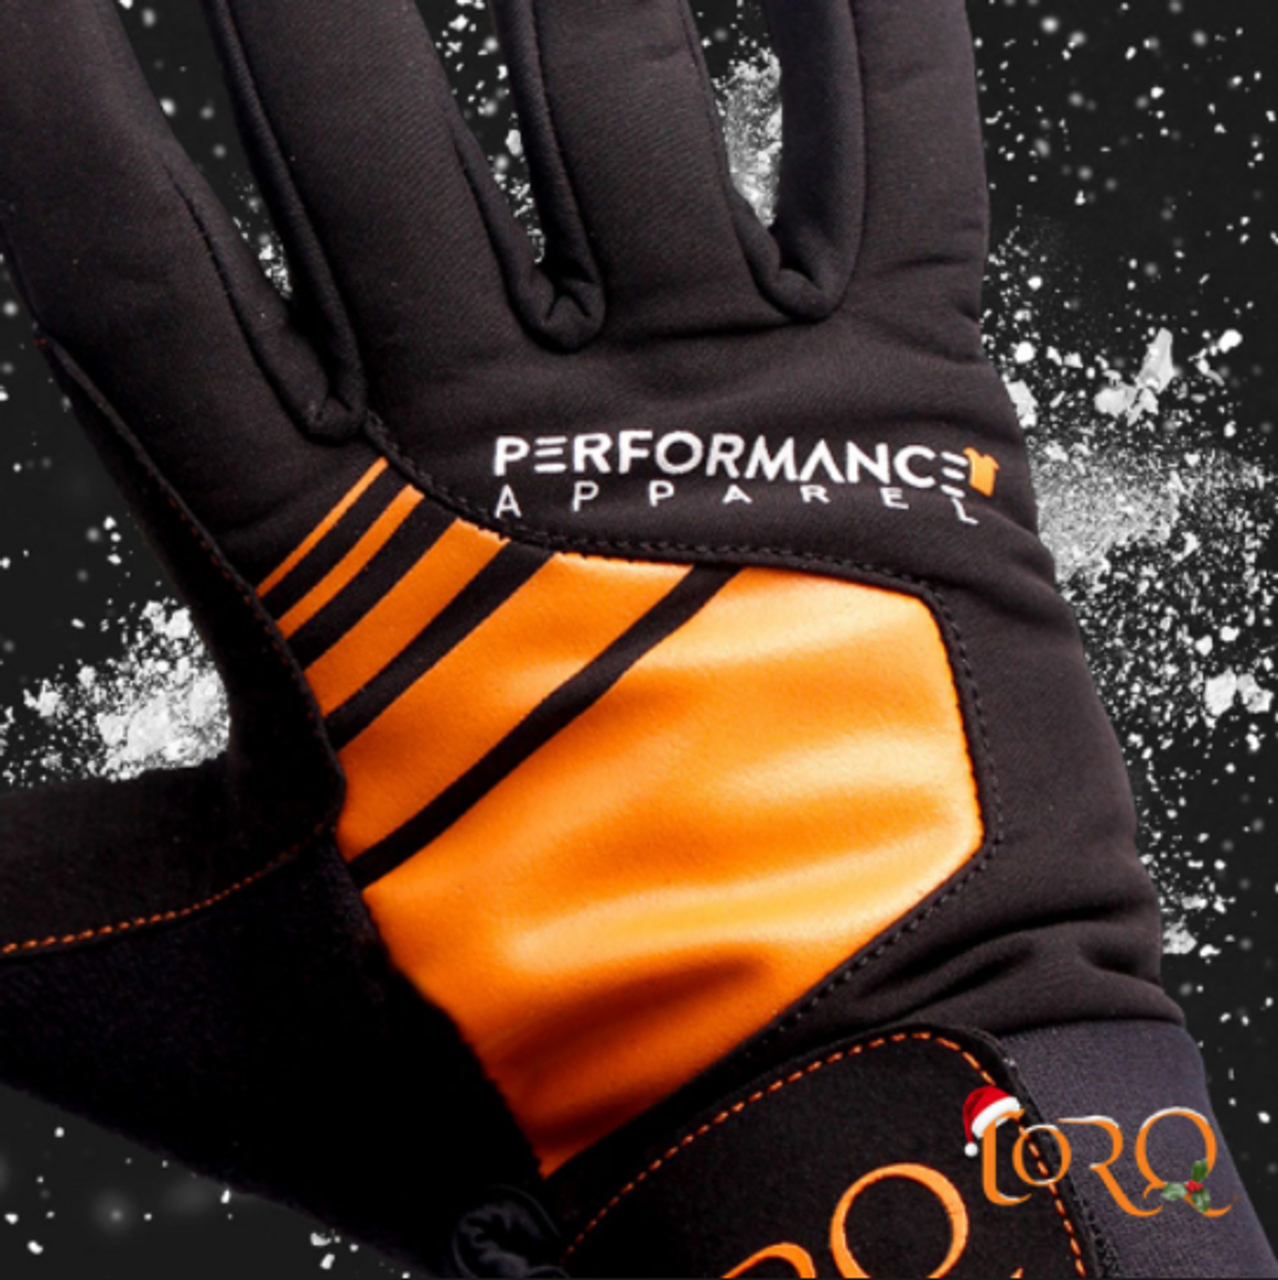 Our technical thermal winter gloves have a thick velcro cuff to keep the warm air in and cold air out and durable palms to tackle the rigors of winter cycling.